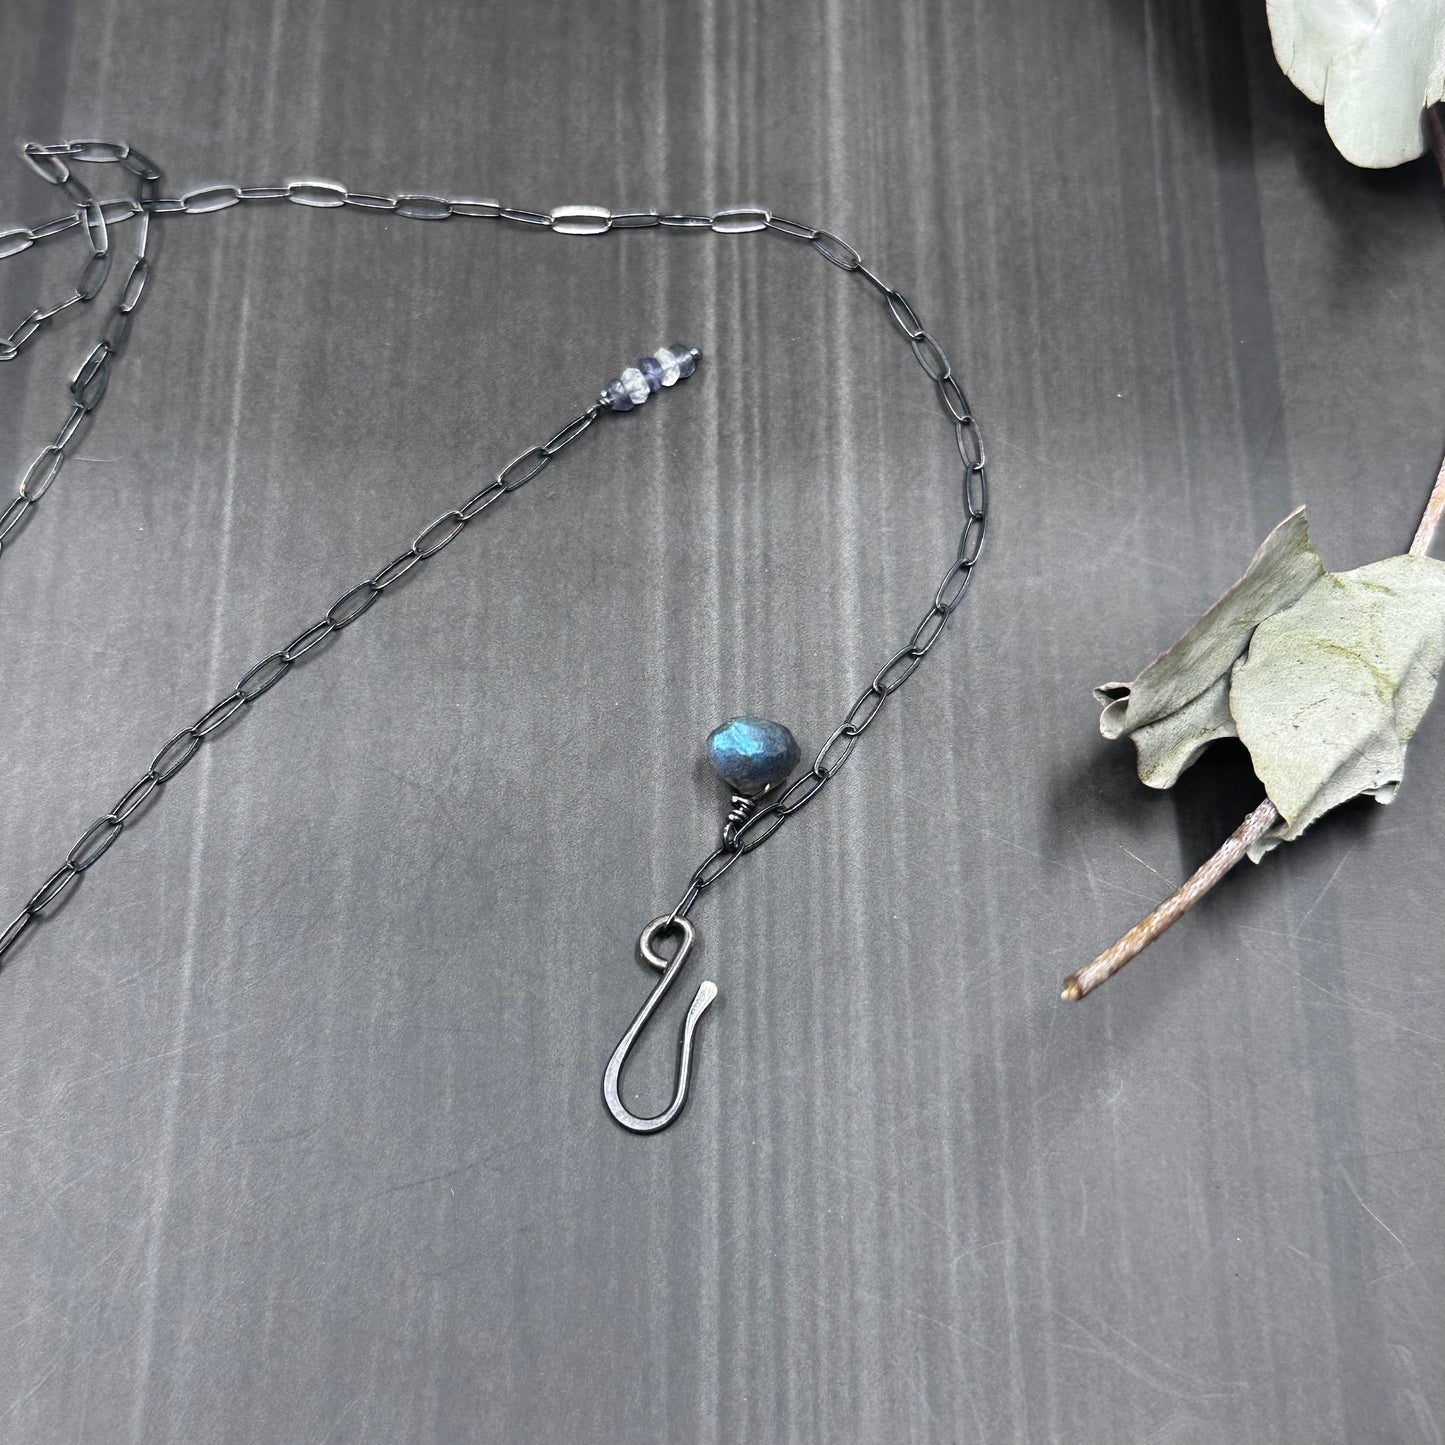 Rainbow moonstone, labradorite, iolite, pyrite, and sterling silver necklace